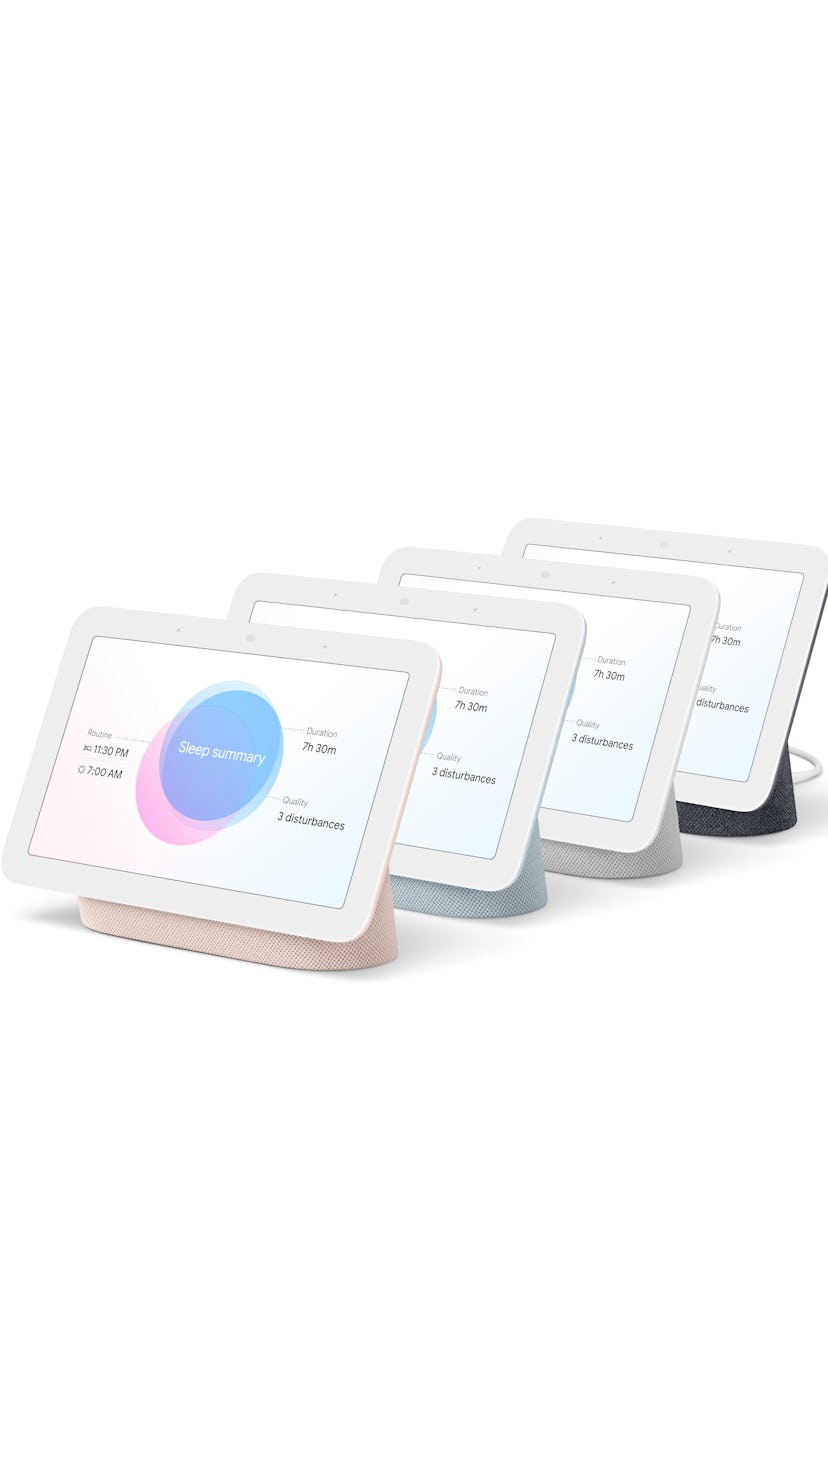 Google Nest Hub 2 in four different colors